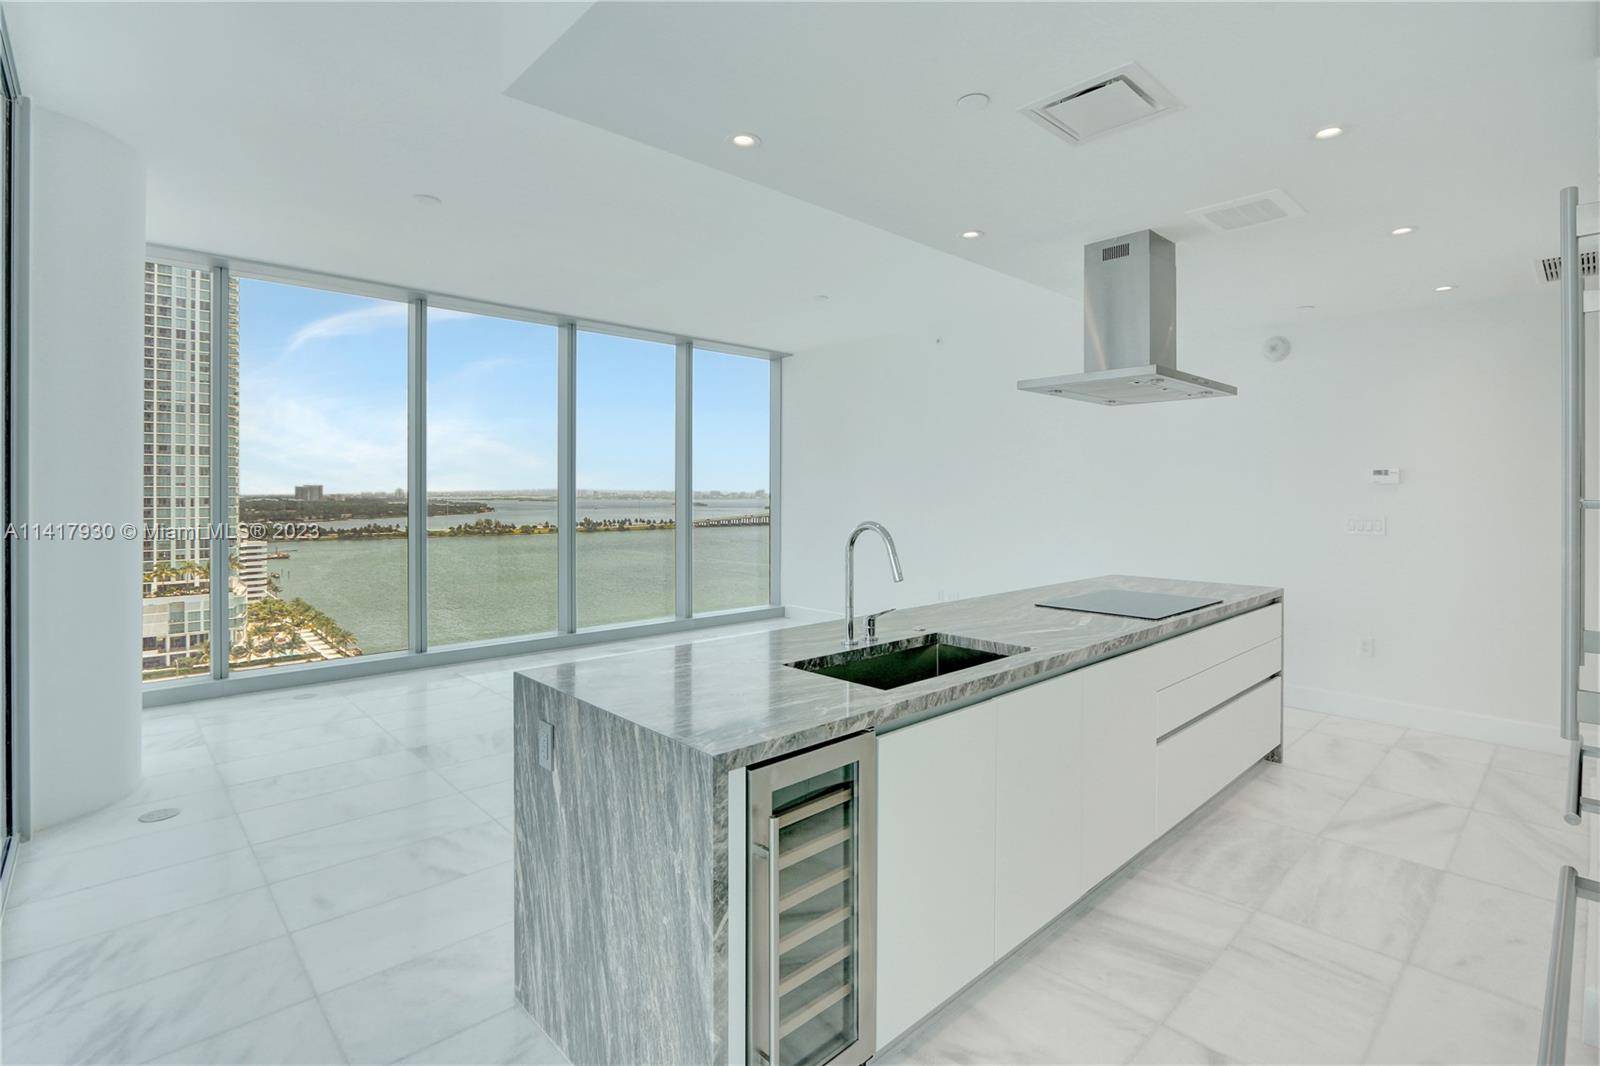 Be the first to live in this stunning 1, 229 sq ft 2 bed 2 bath corner unit in Missoni Baia, the newest building in Miami !